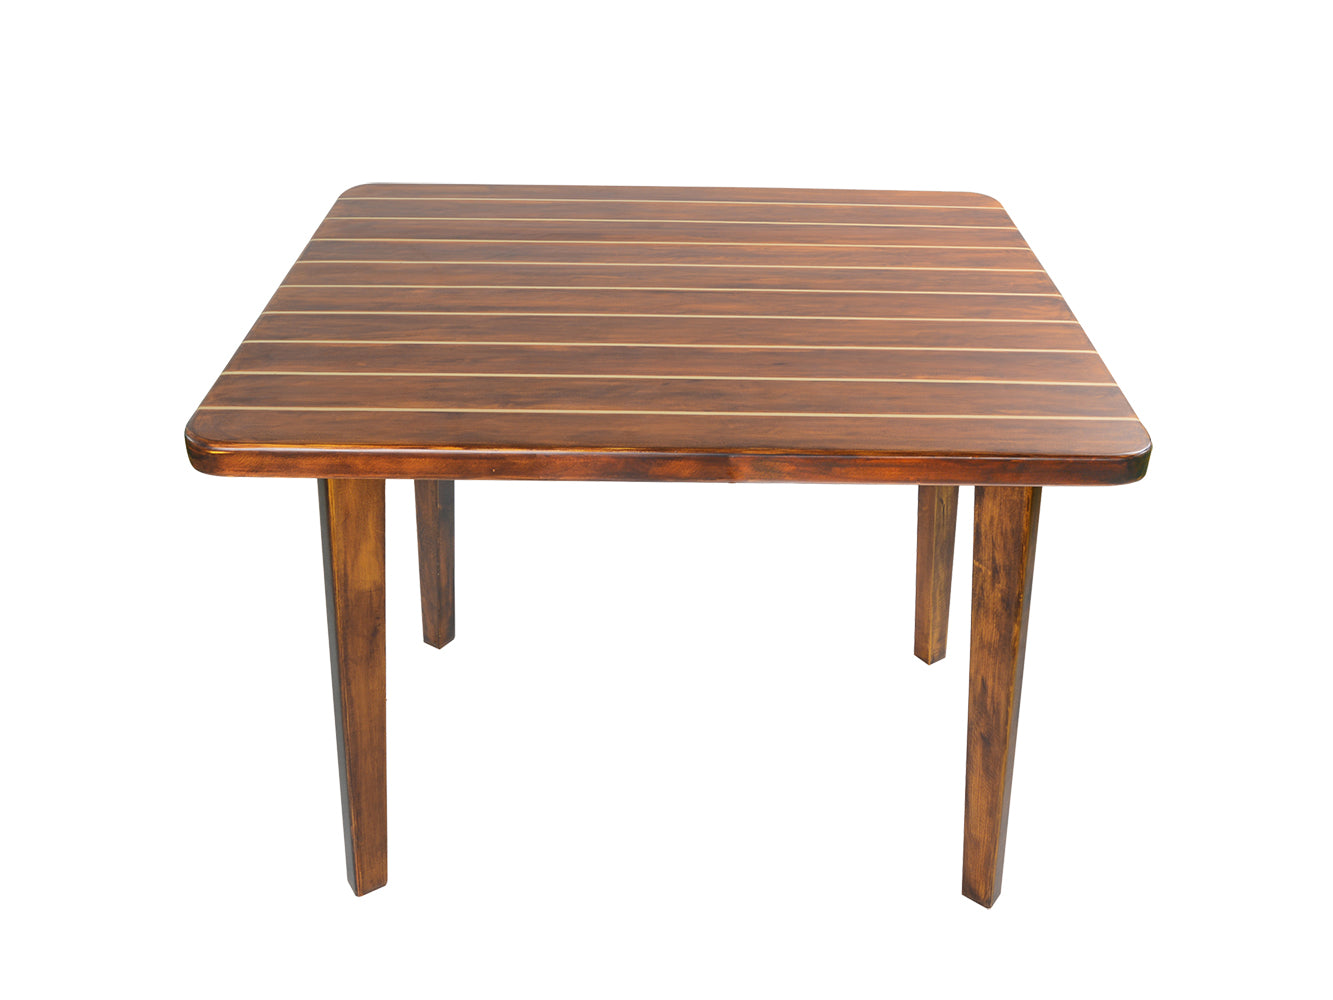 NAUTICAL TABLE WITH INLAY WOOD STRIPES SMALL